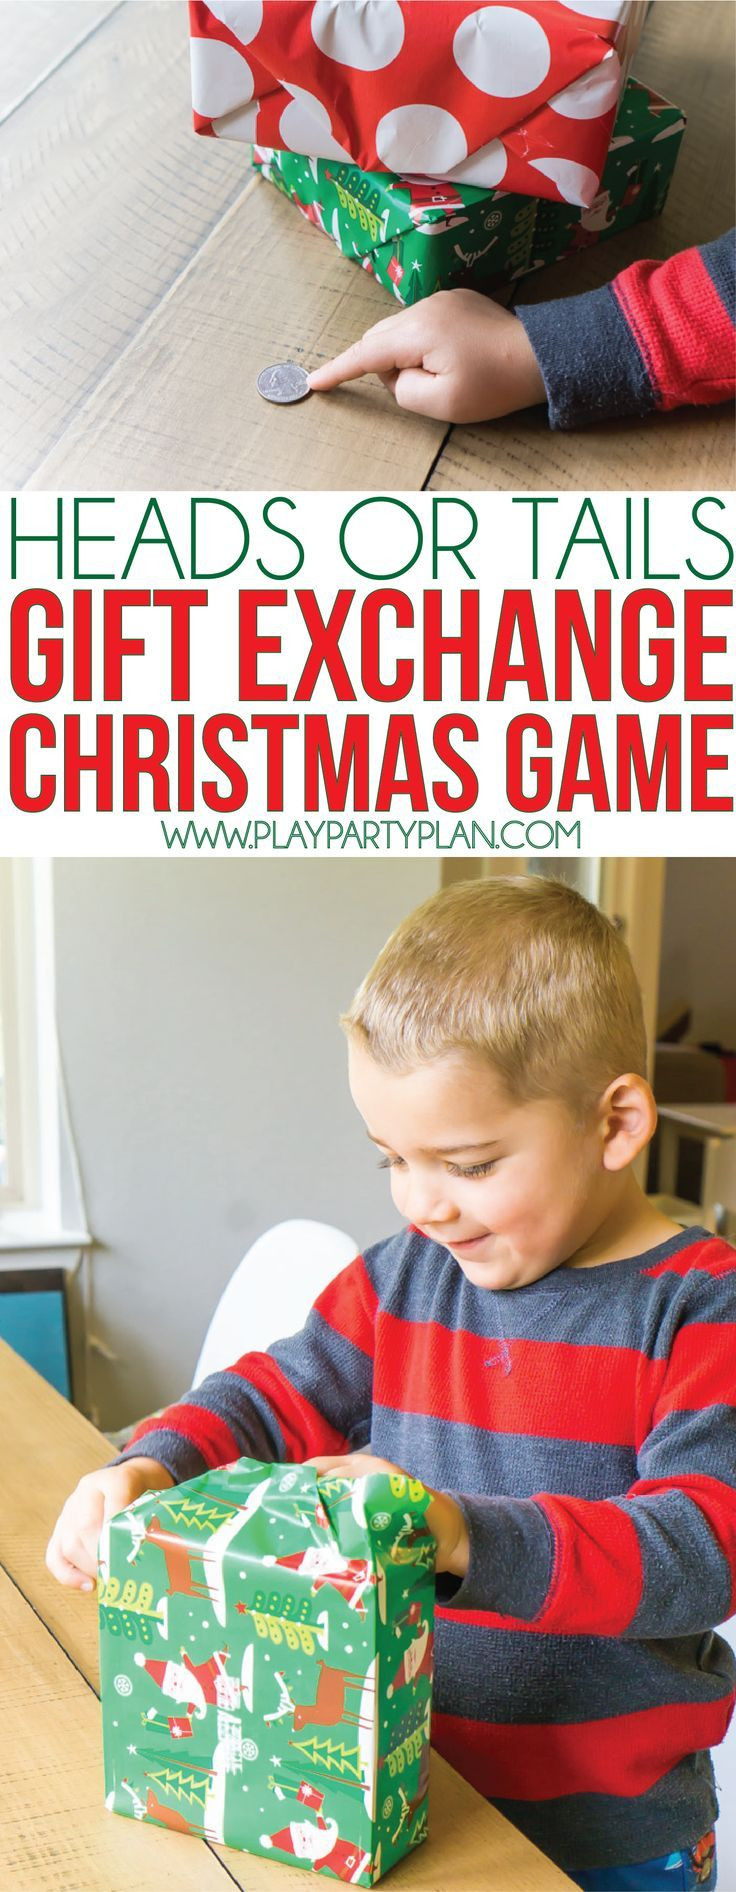 Holiday Gift Exchange Ideas For Groups
 Heads or Tails White Elephant Gift Exchange Game